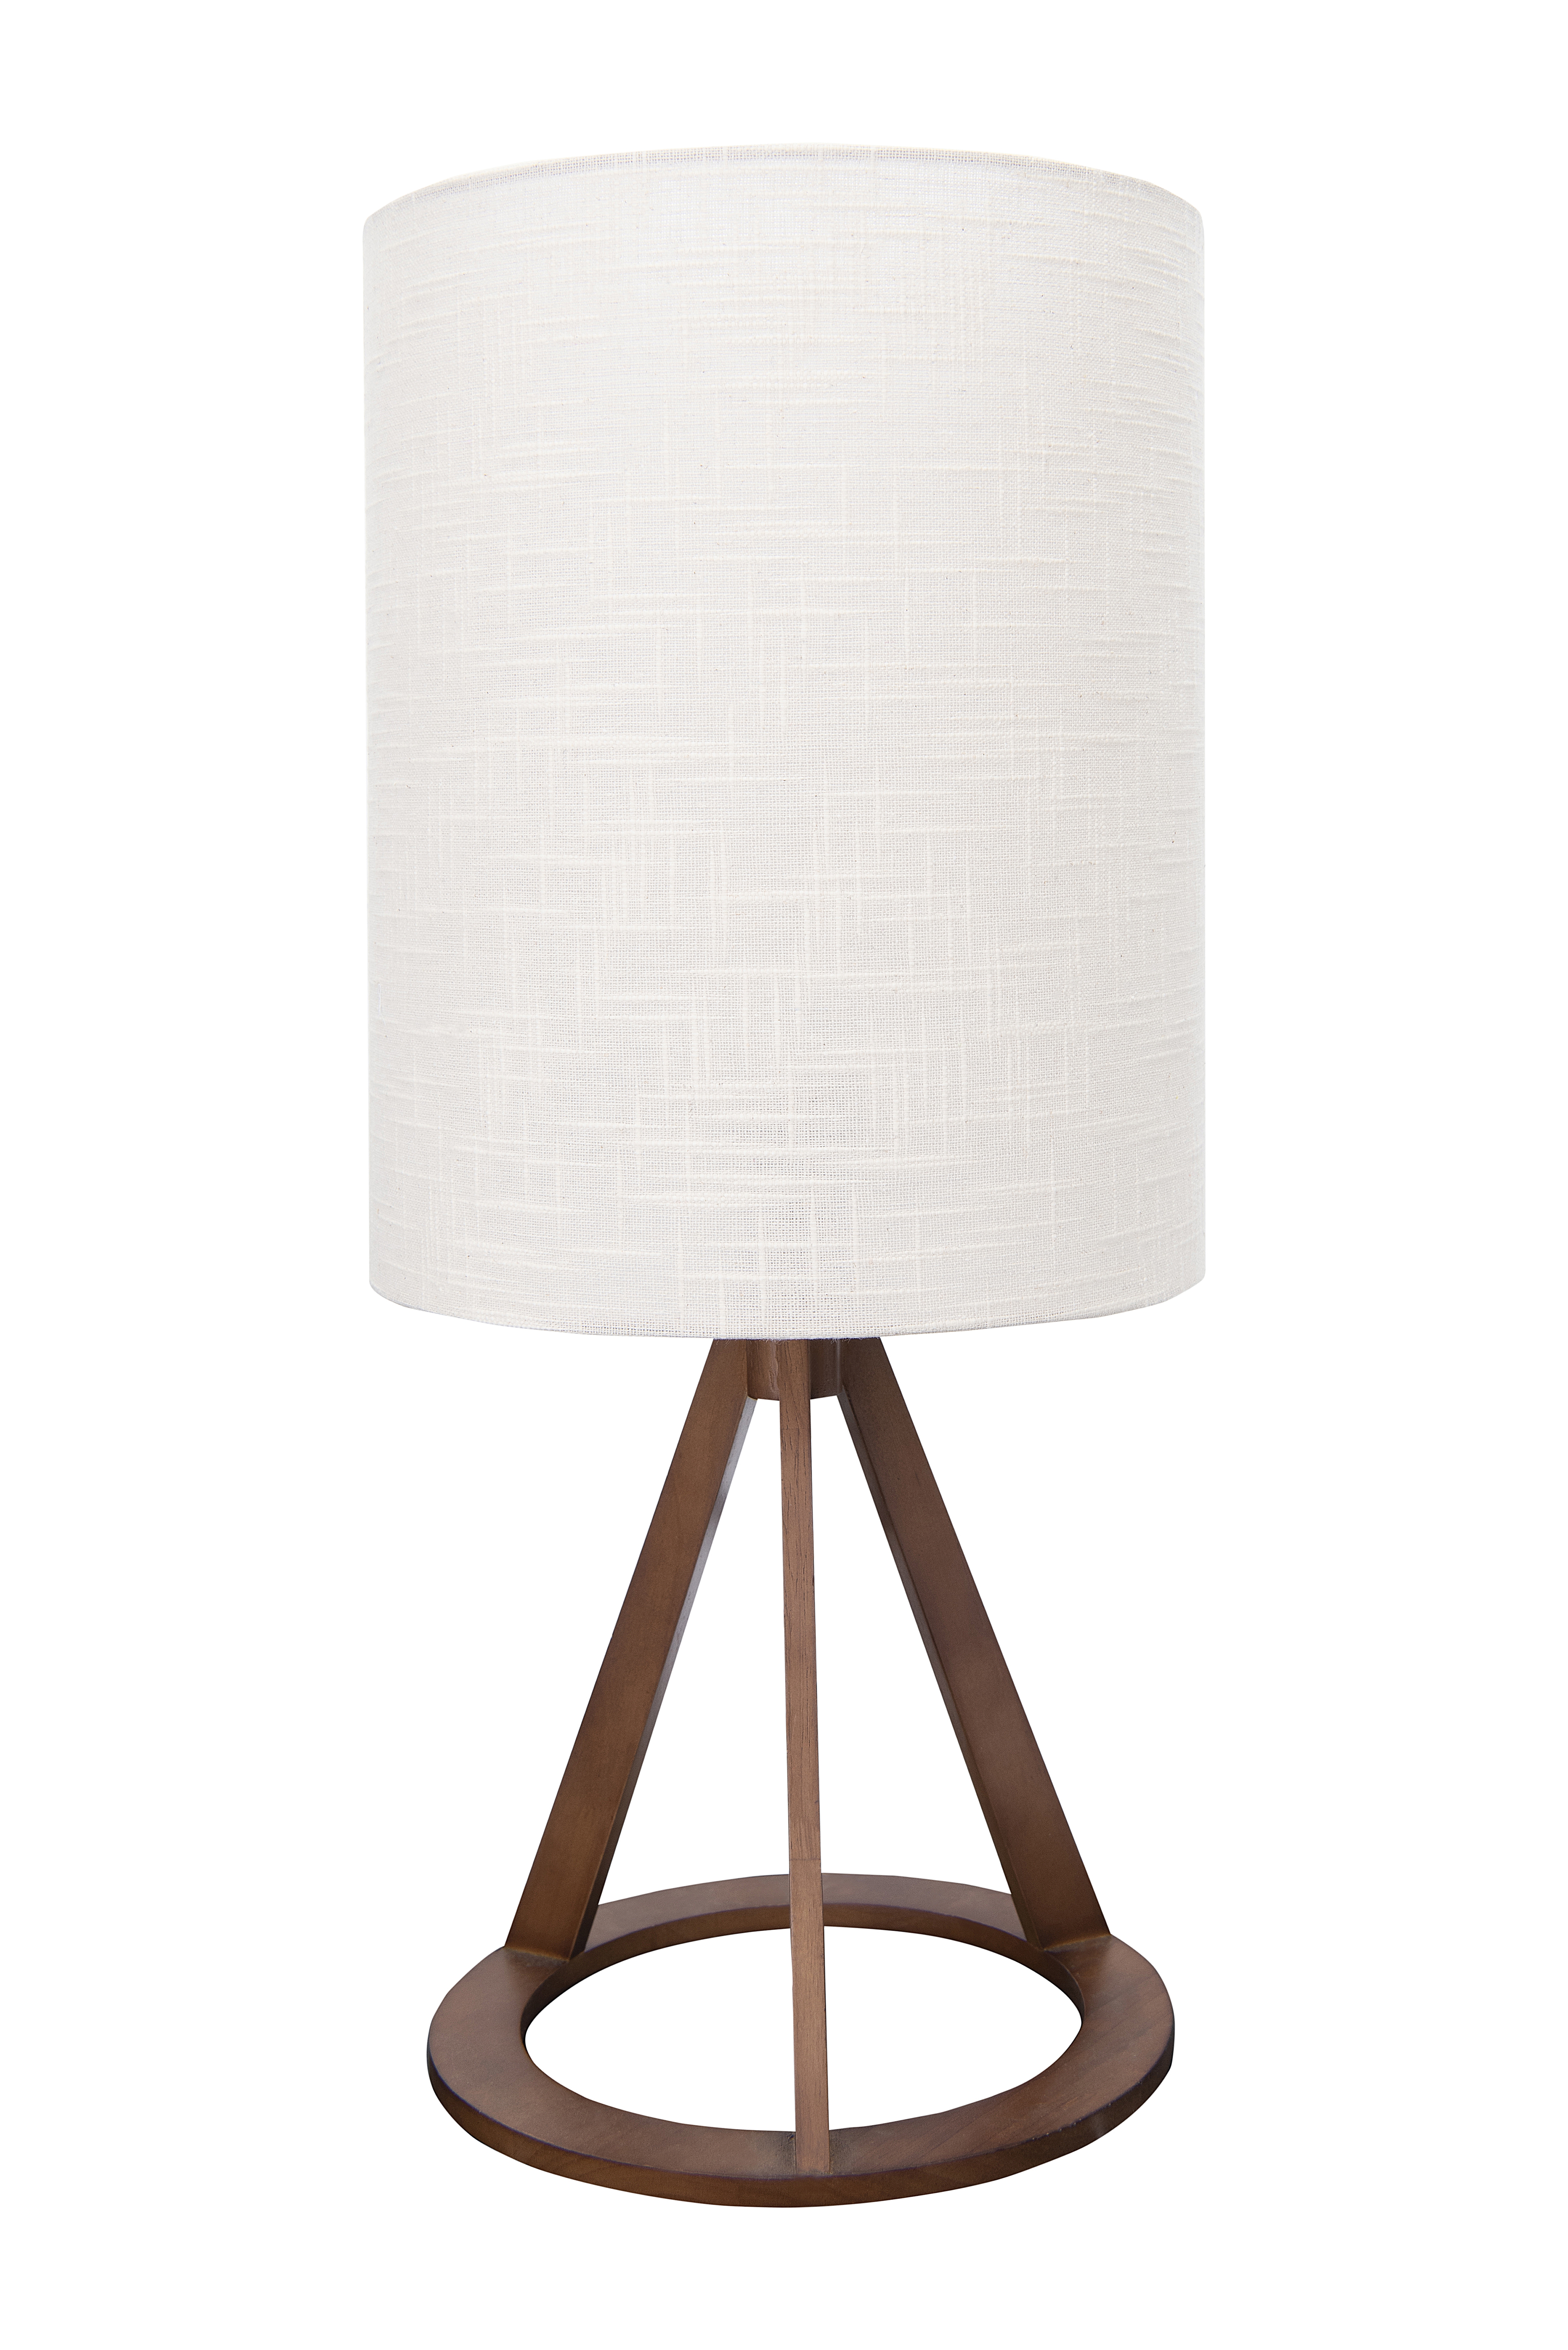 Geometric Wood Table Lamp with Linen Shade - Image 0